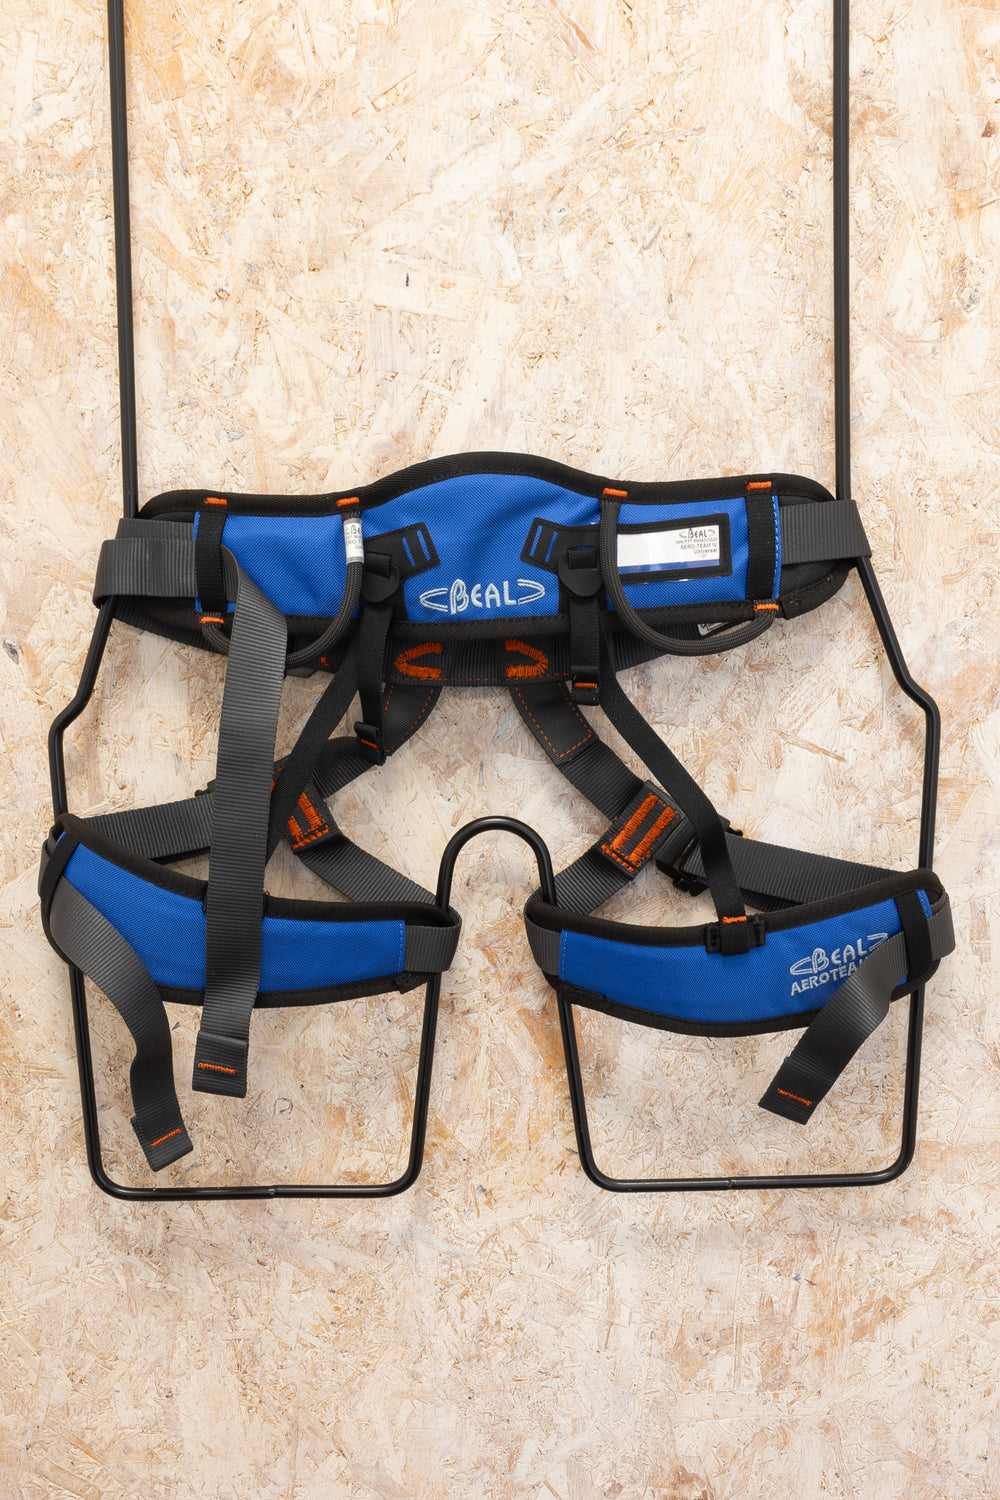 Beal - AeroTeam IV Harness (One Size)